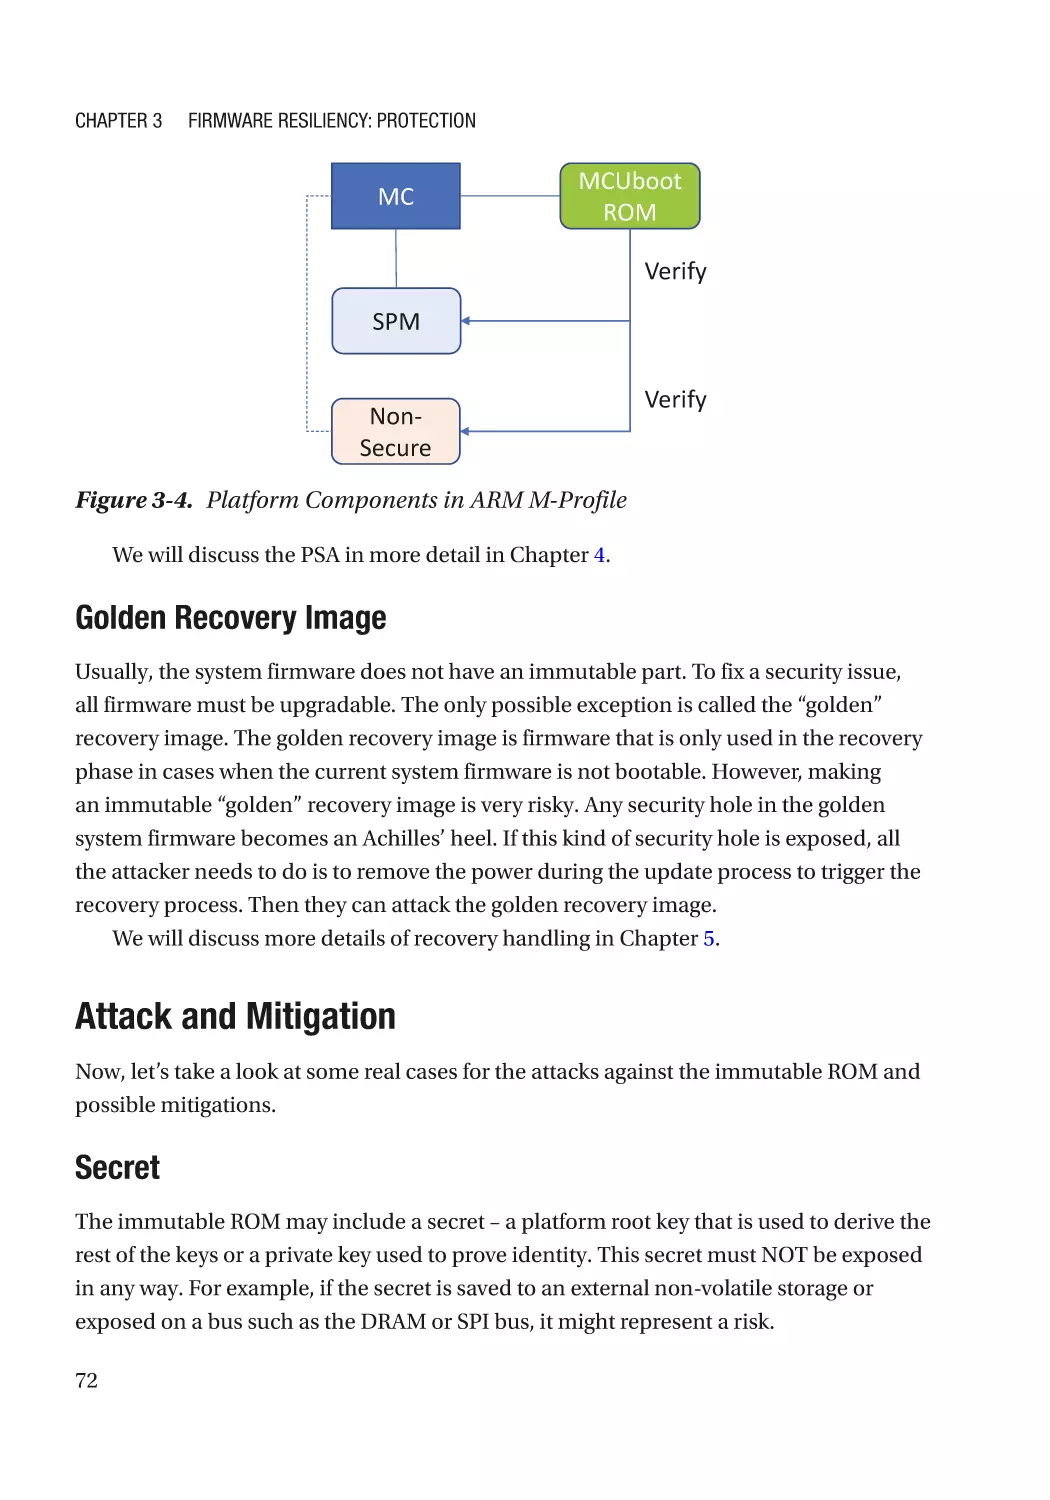 Golden Recovery Image
Attack and Mitigation
Secret